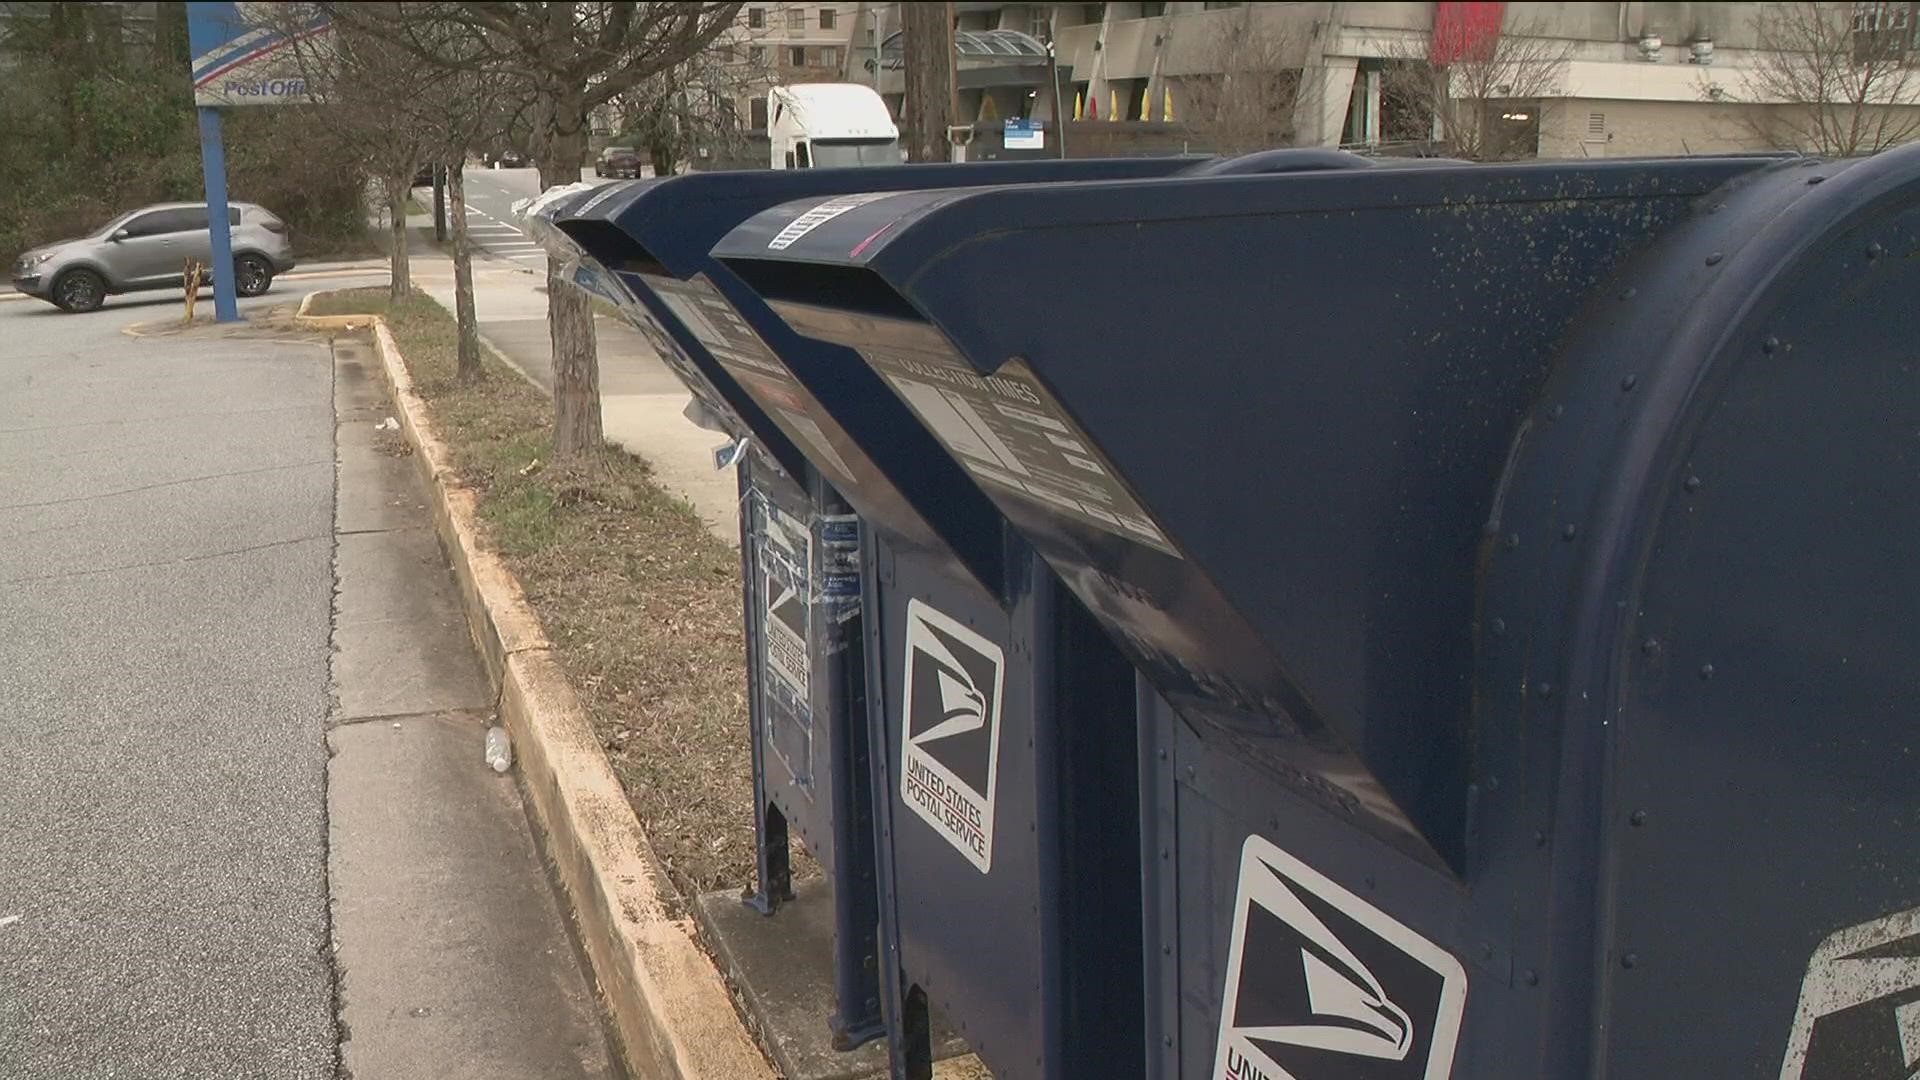 Thieves are breaking into U.S. Postal Drop Boxes, stealing checks, then "washing" the contents and replacing with fake information, cashing them and making big money